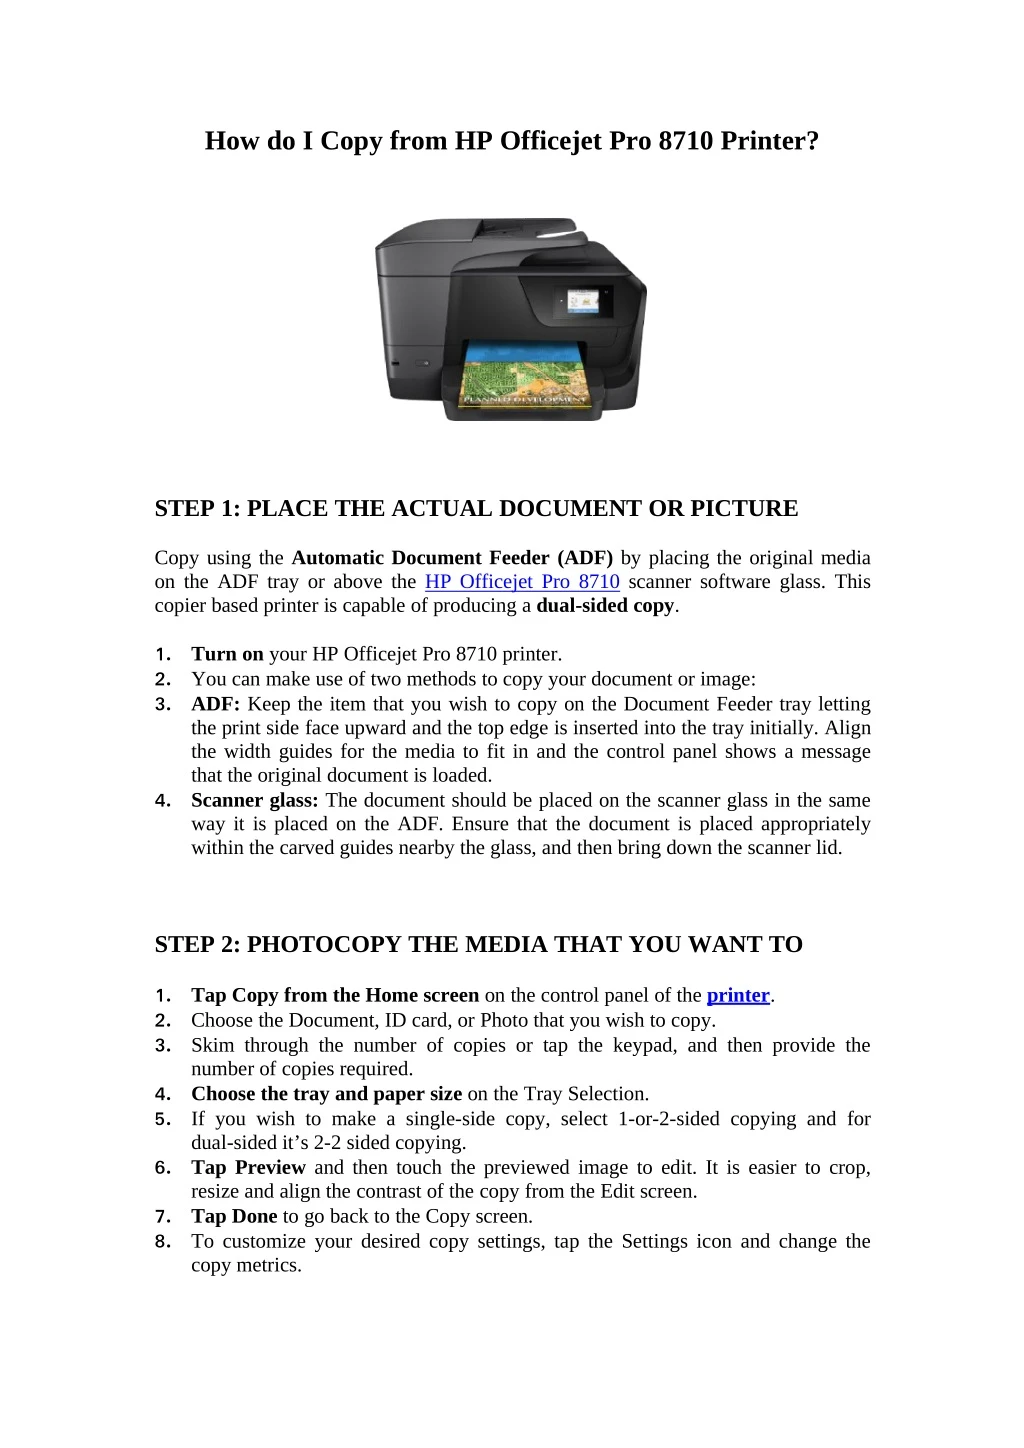 how do i copy from hp officejet pro 8710 printer